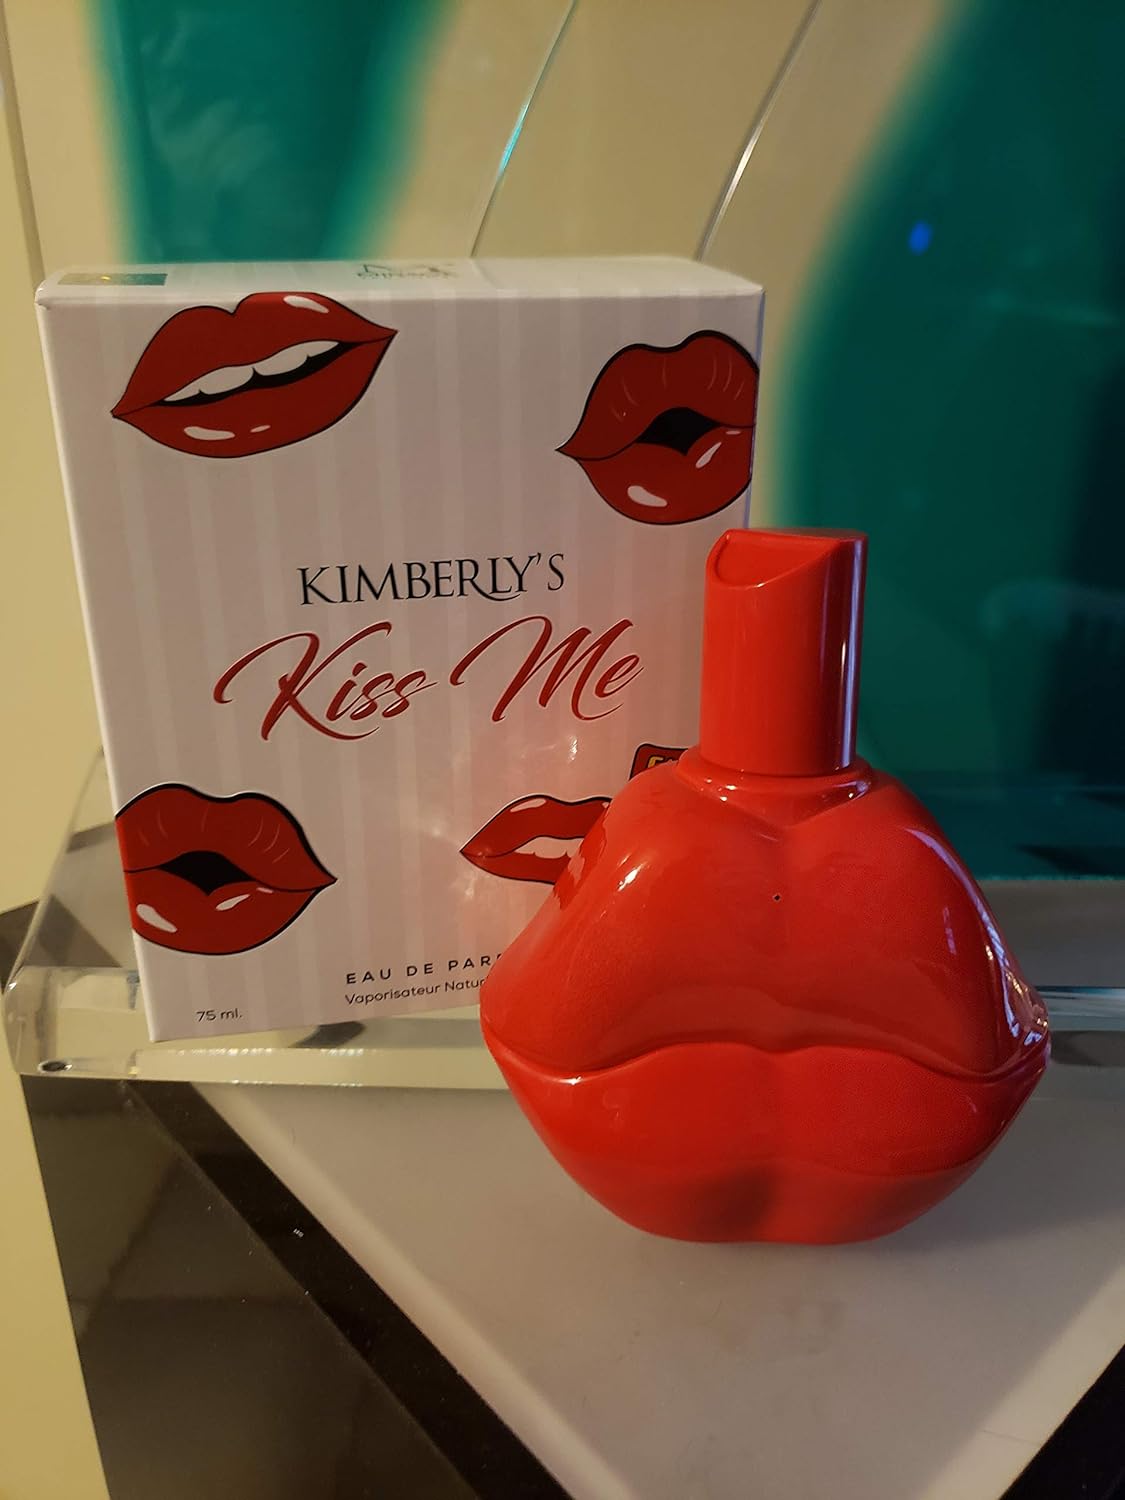 KIMBERLY'S KISS ME celebrity impression perfume by MIRAGE BRANDS